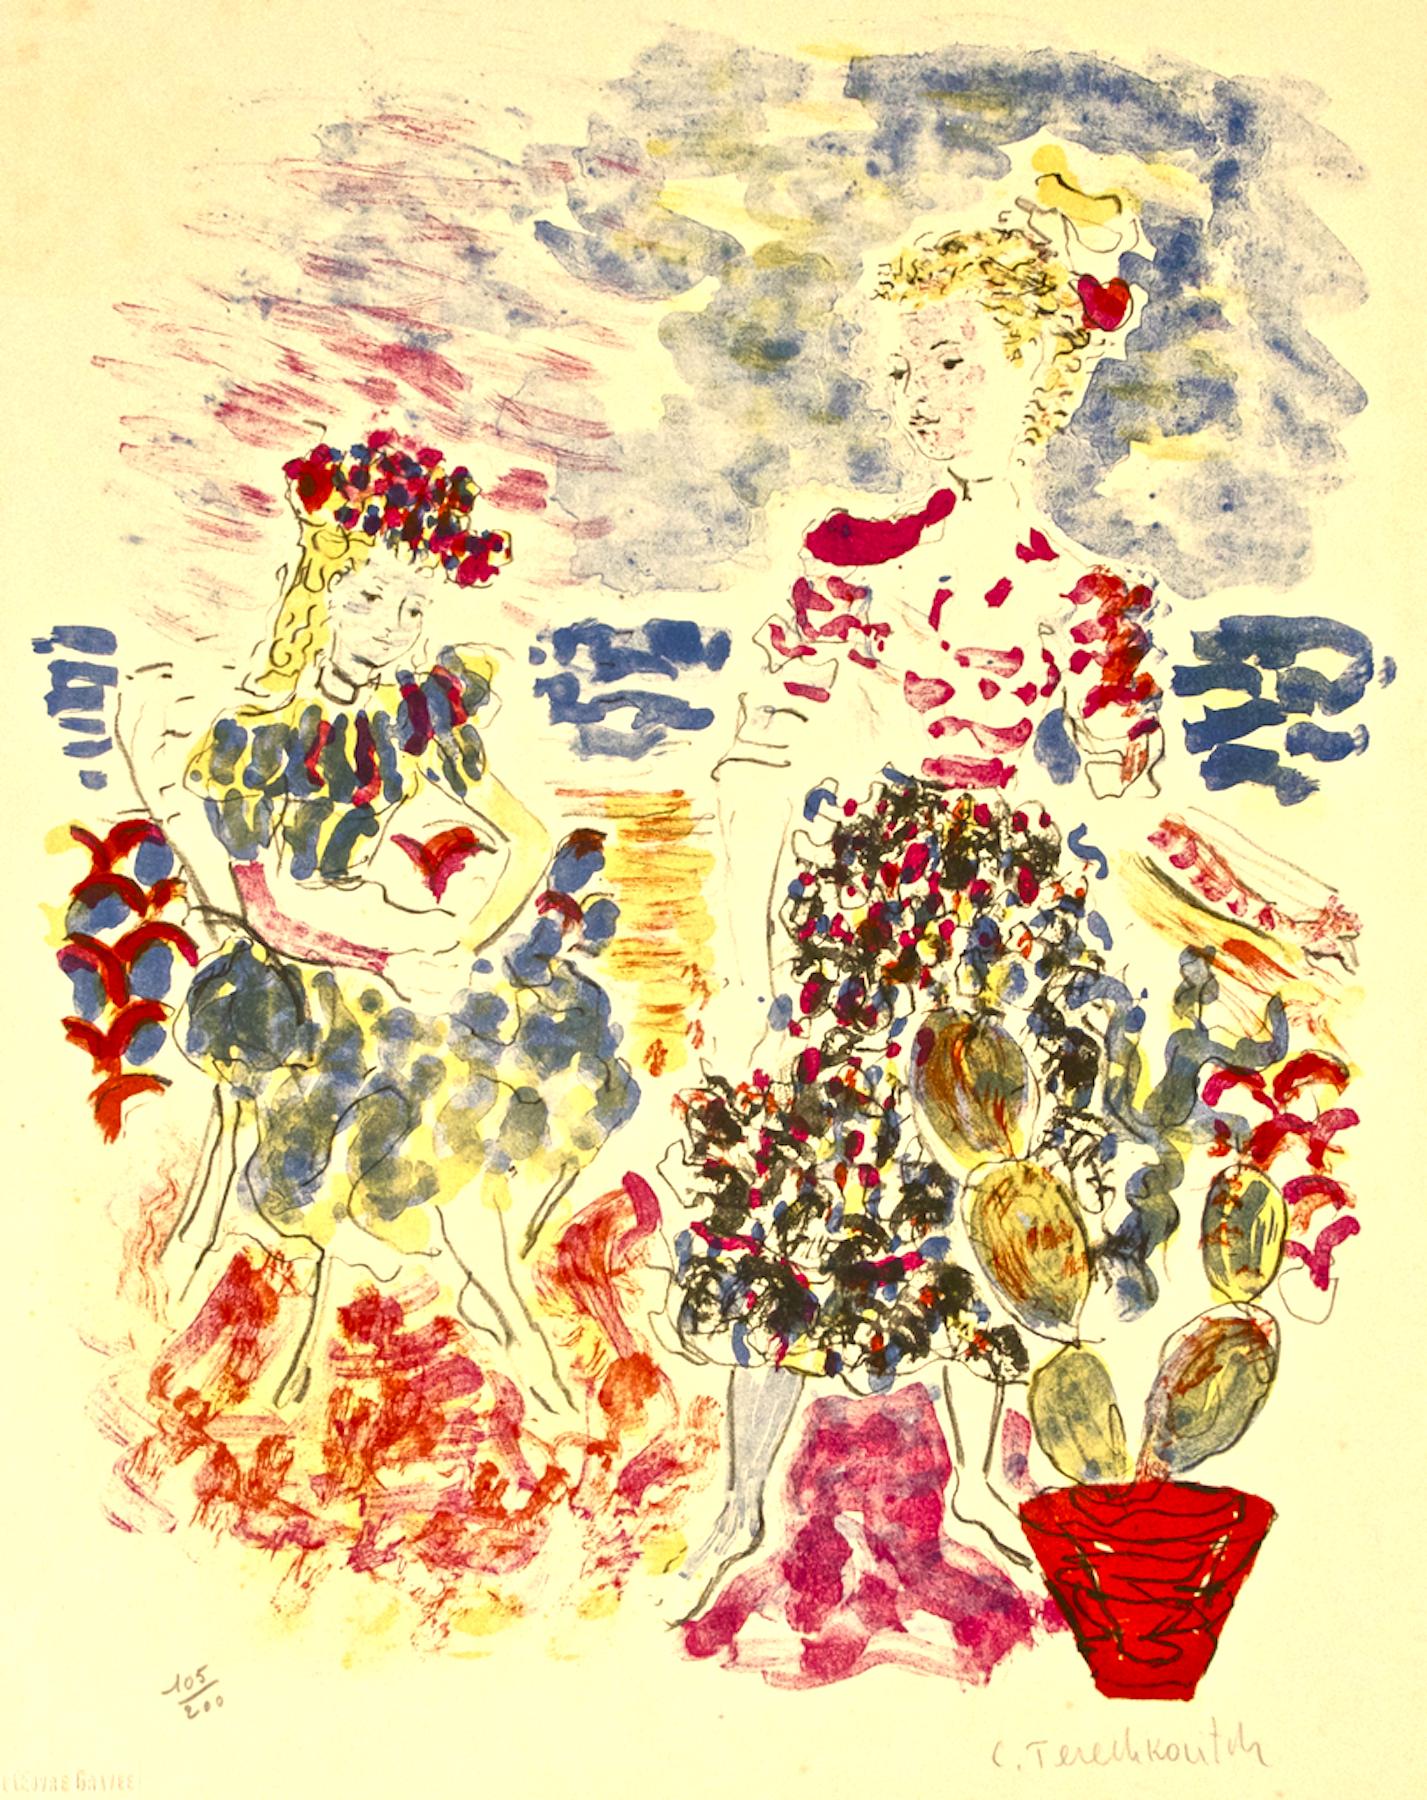 Bridesmaids with Flowers - Original Lithograph by C. Terechkovitch 